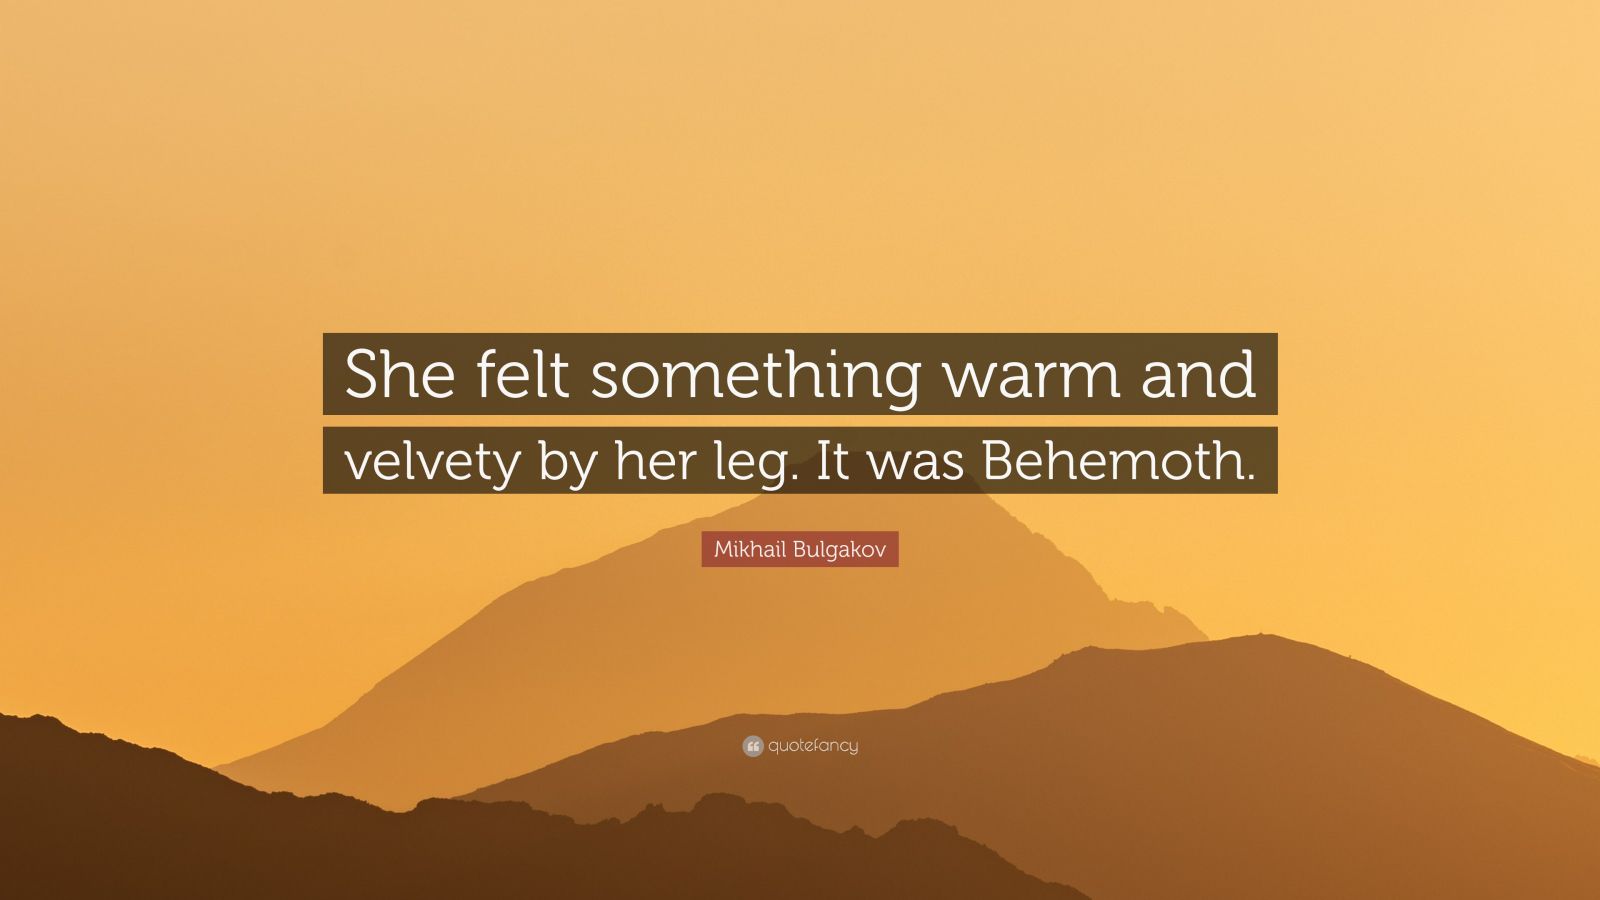 Keep your legs warm with your quotes from your favorite books